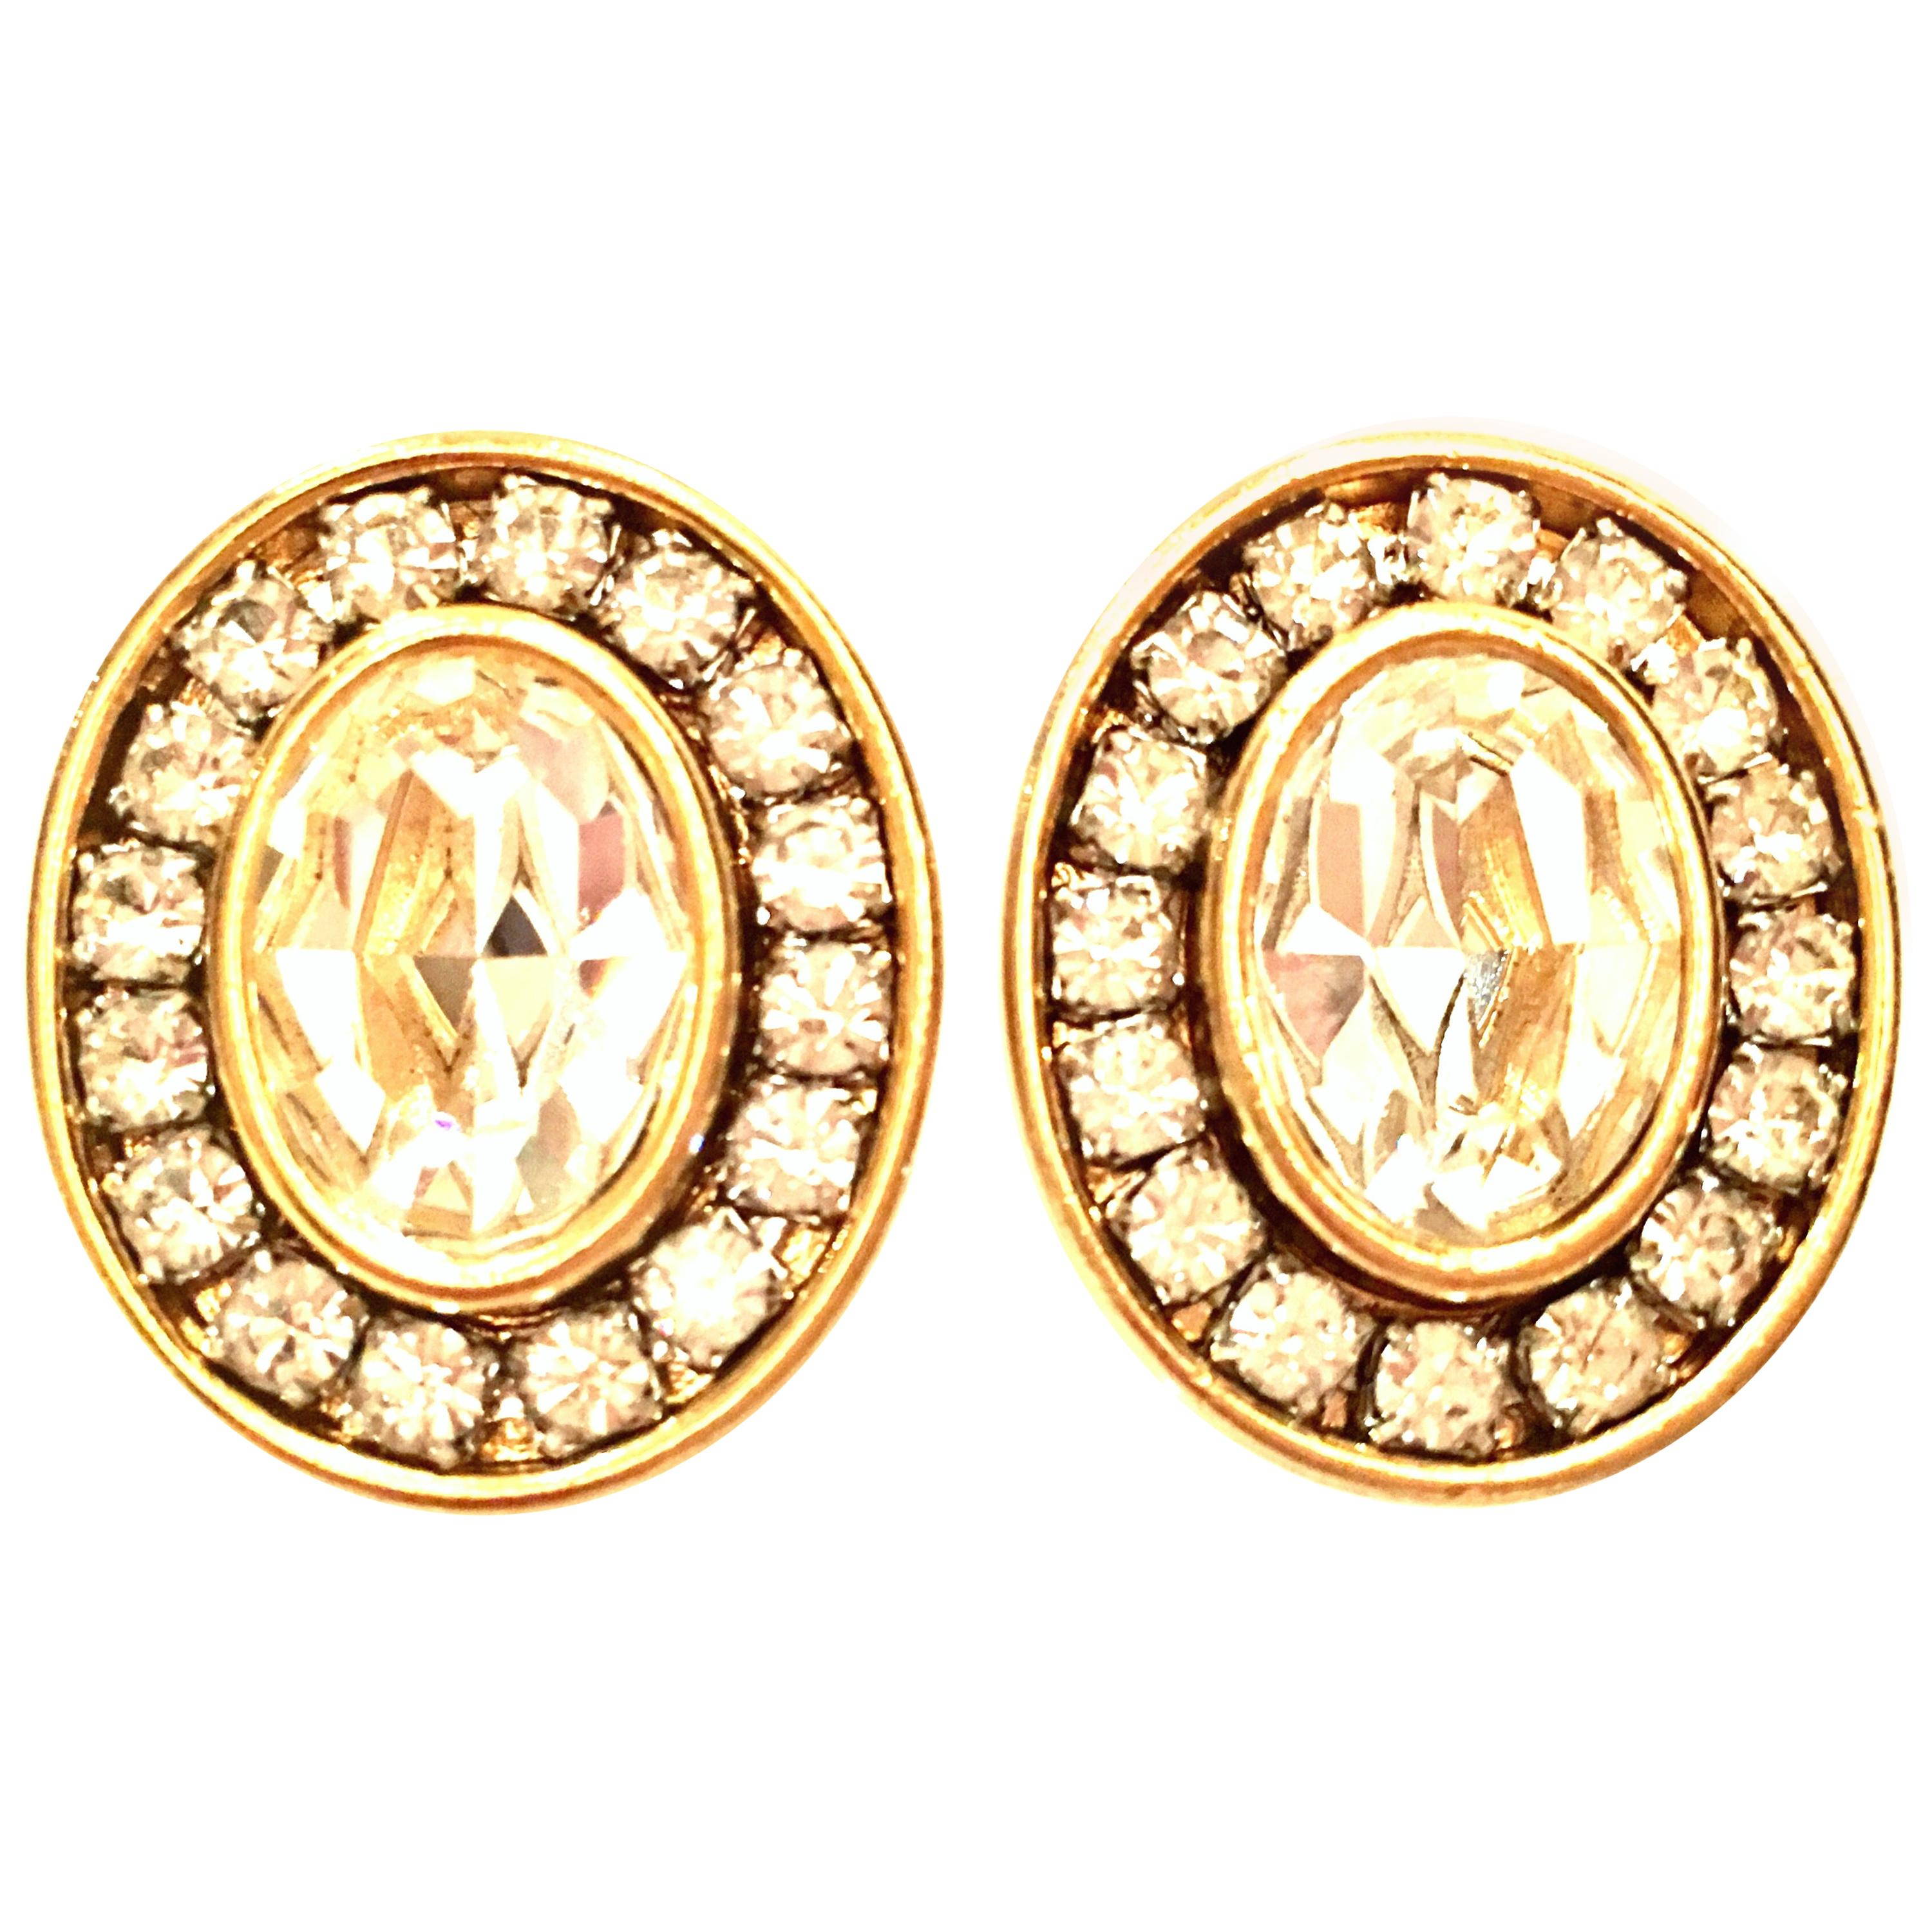 20th Century Gold & Swarovski Crystal Earrings By, Givenchy For Sale